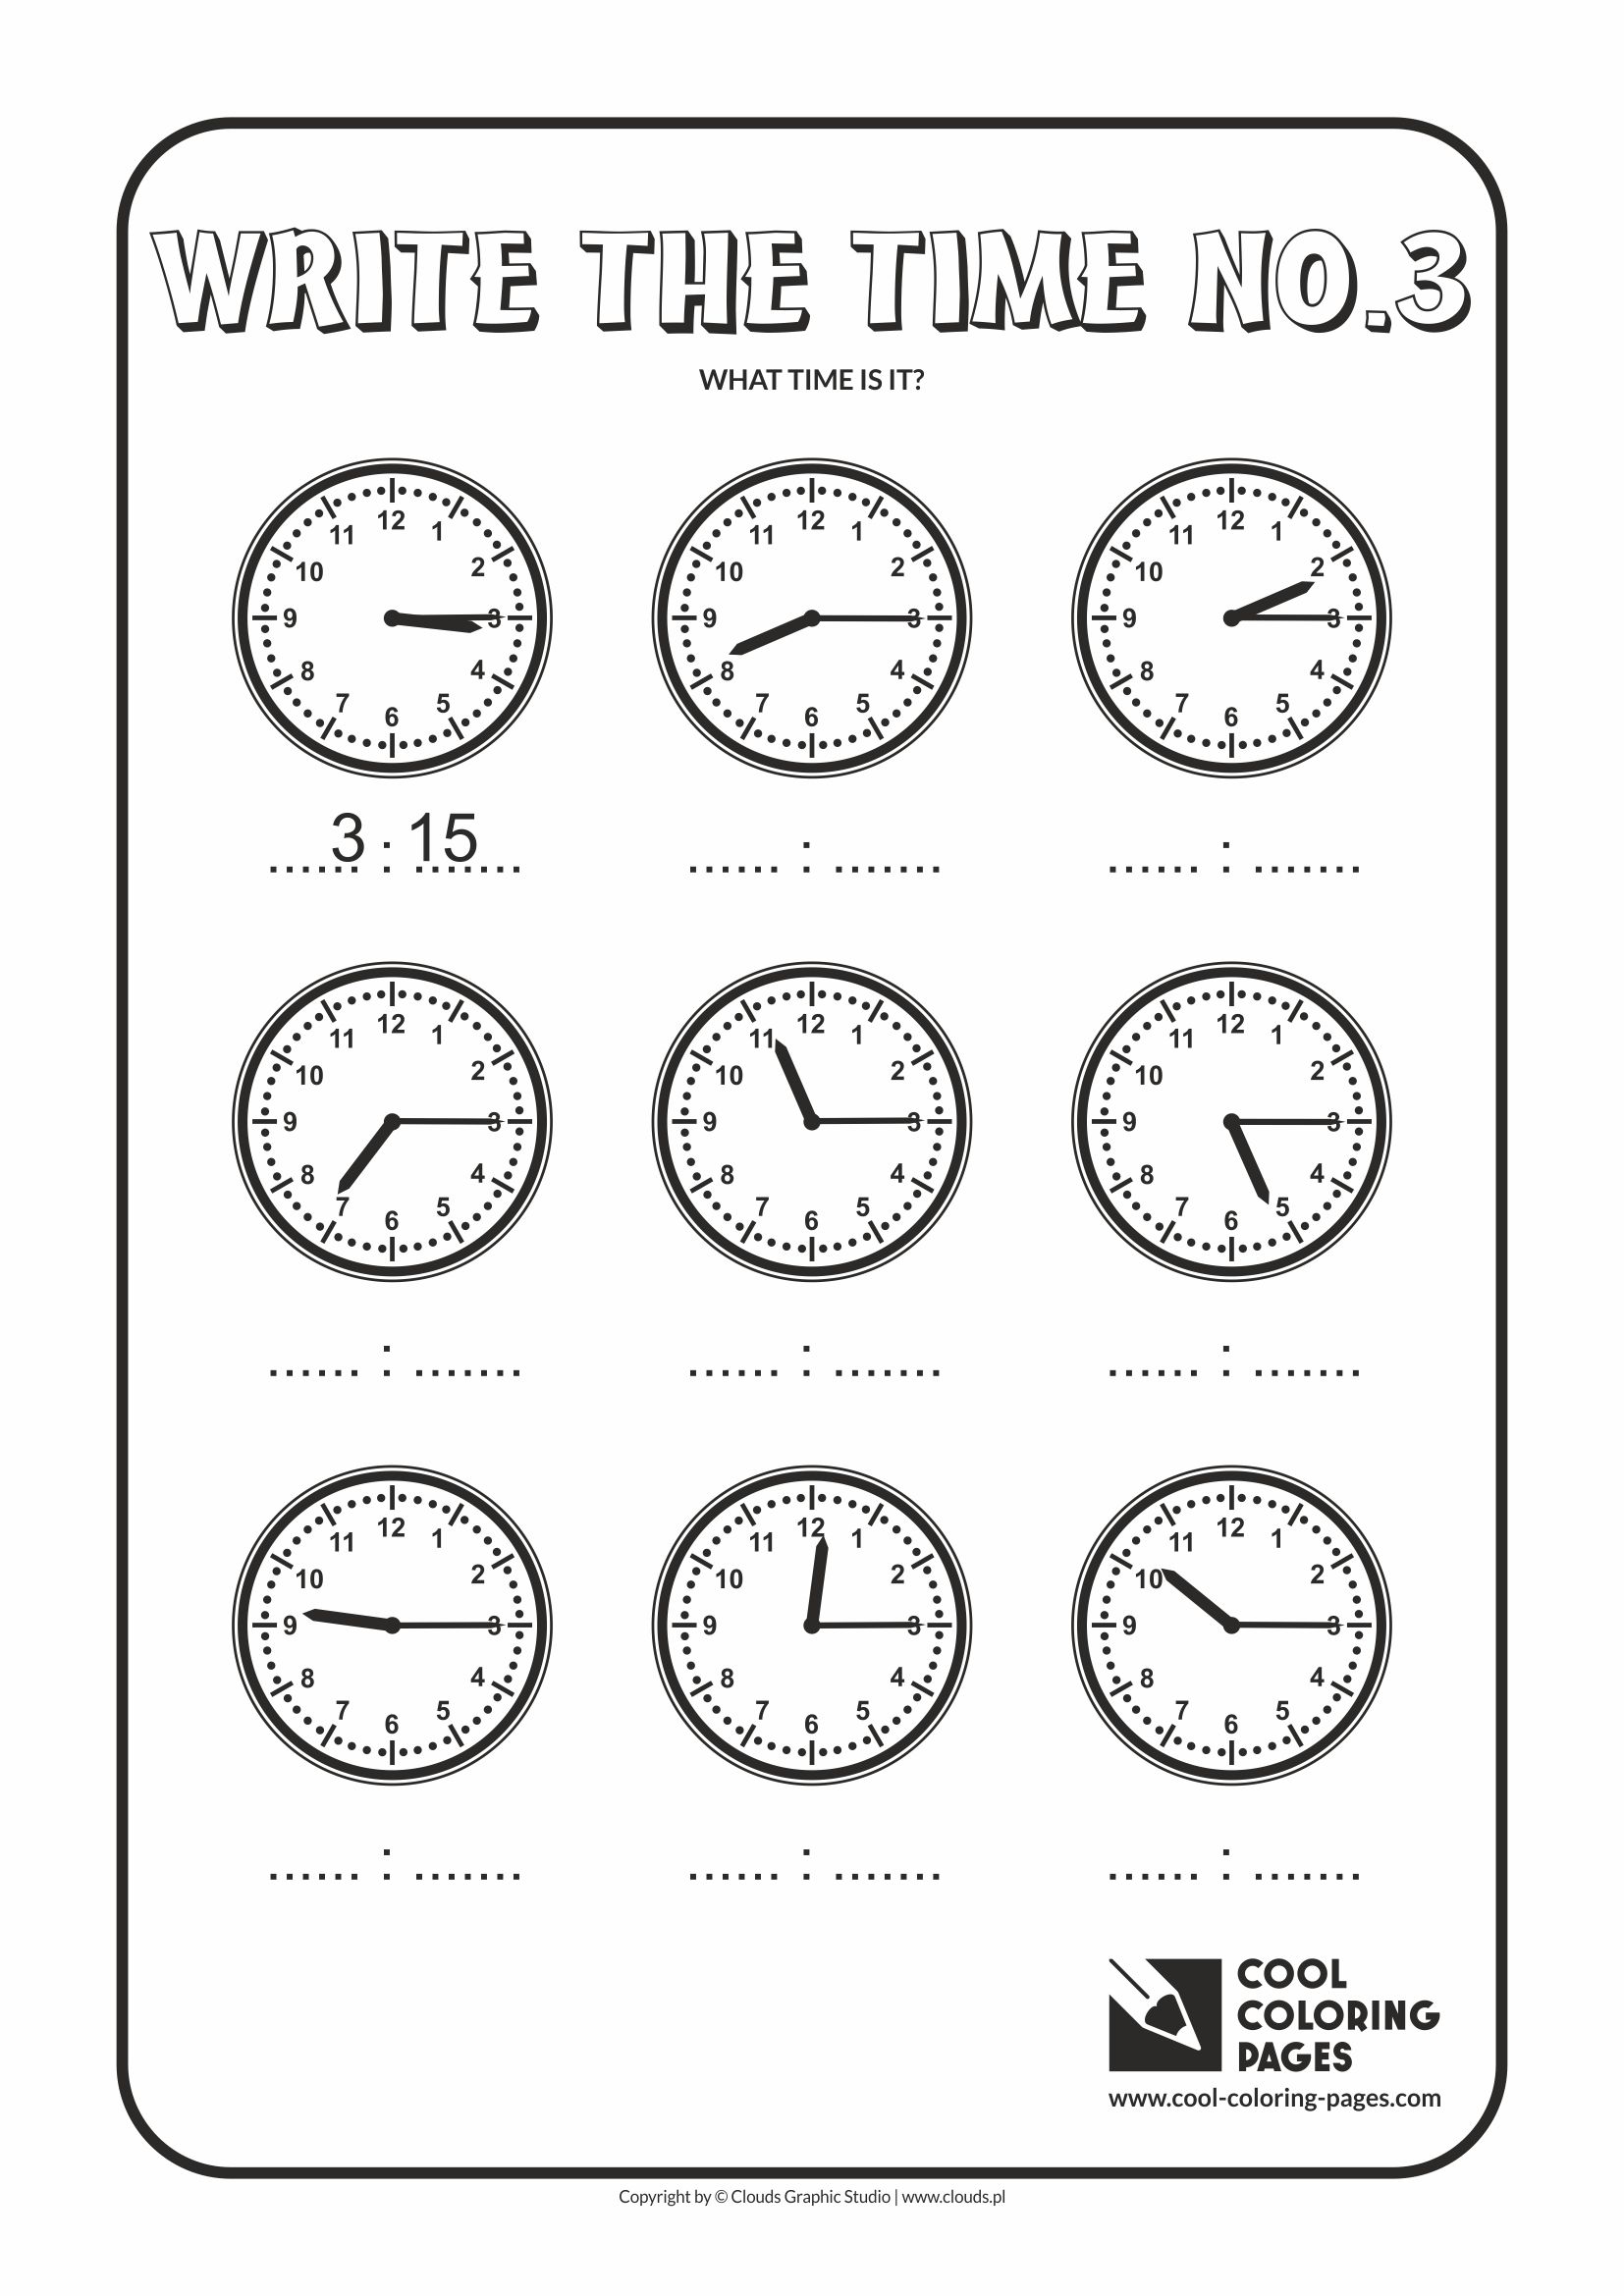 Cool Coloring Pages - Time / Write the time no.3